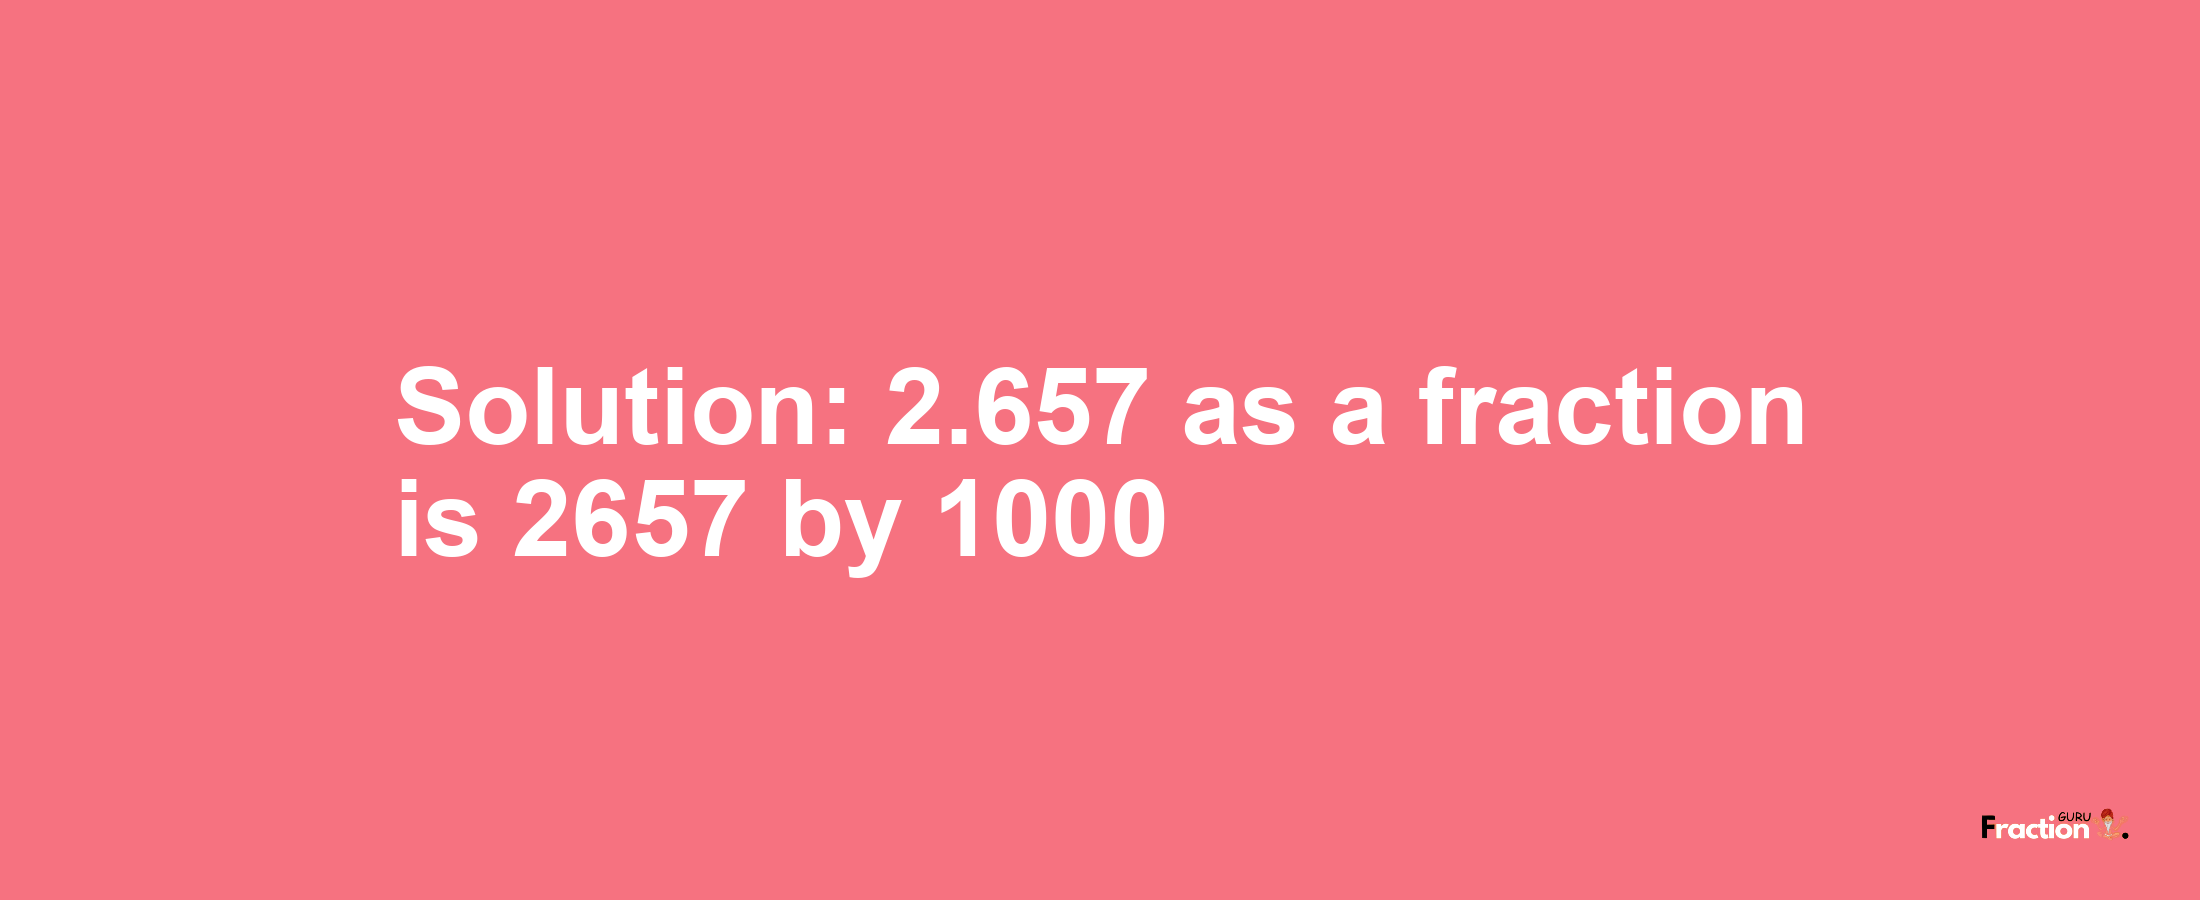 Solution:2.657 as a fraction is 2657/1000